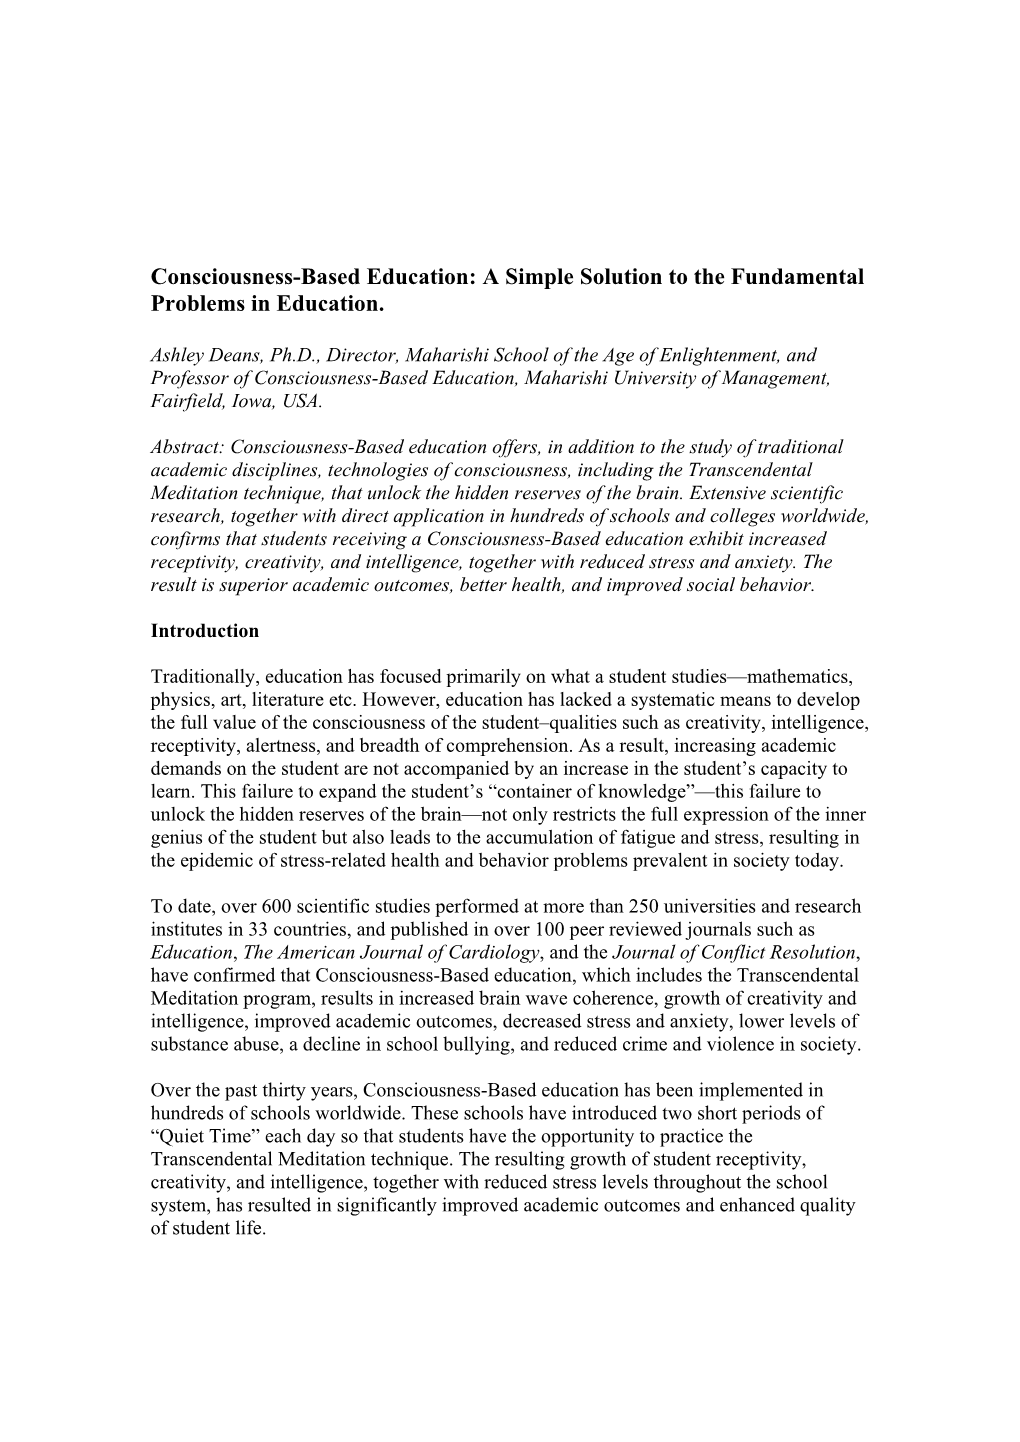 Consciousness-Based Education: a Simple Solution to the Fundamental Problems in Education